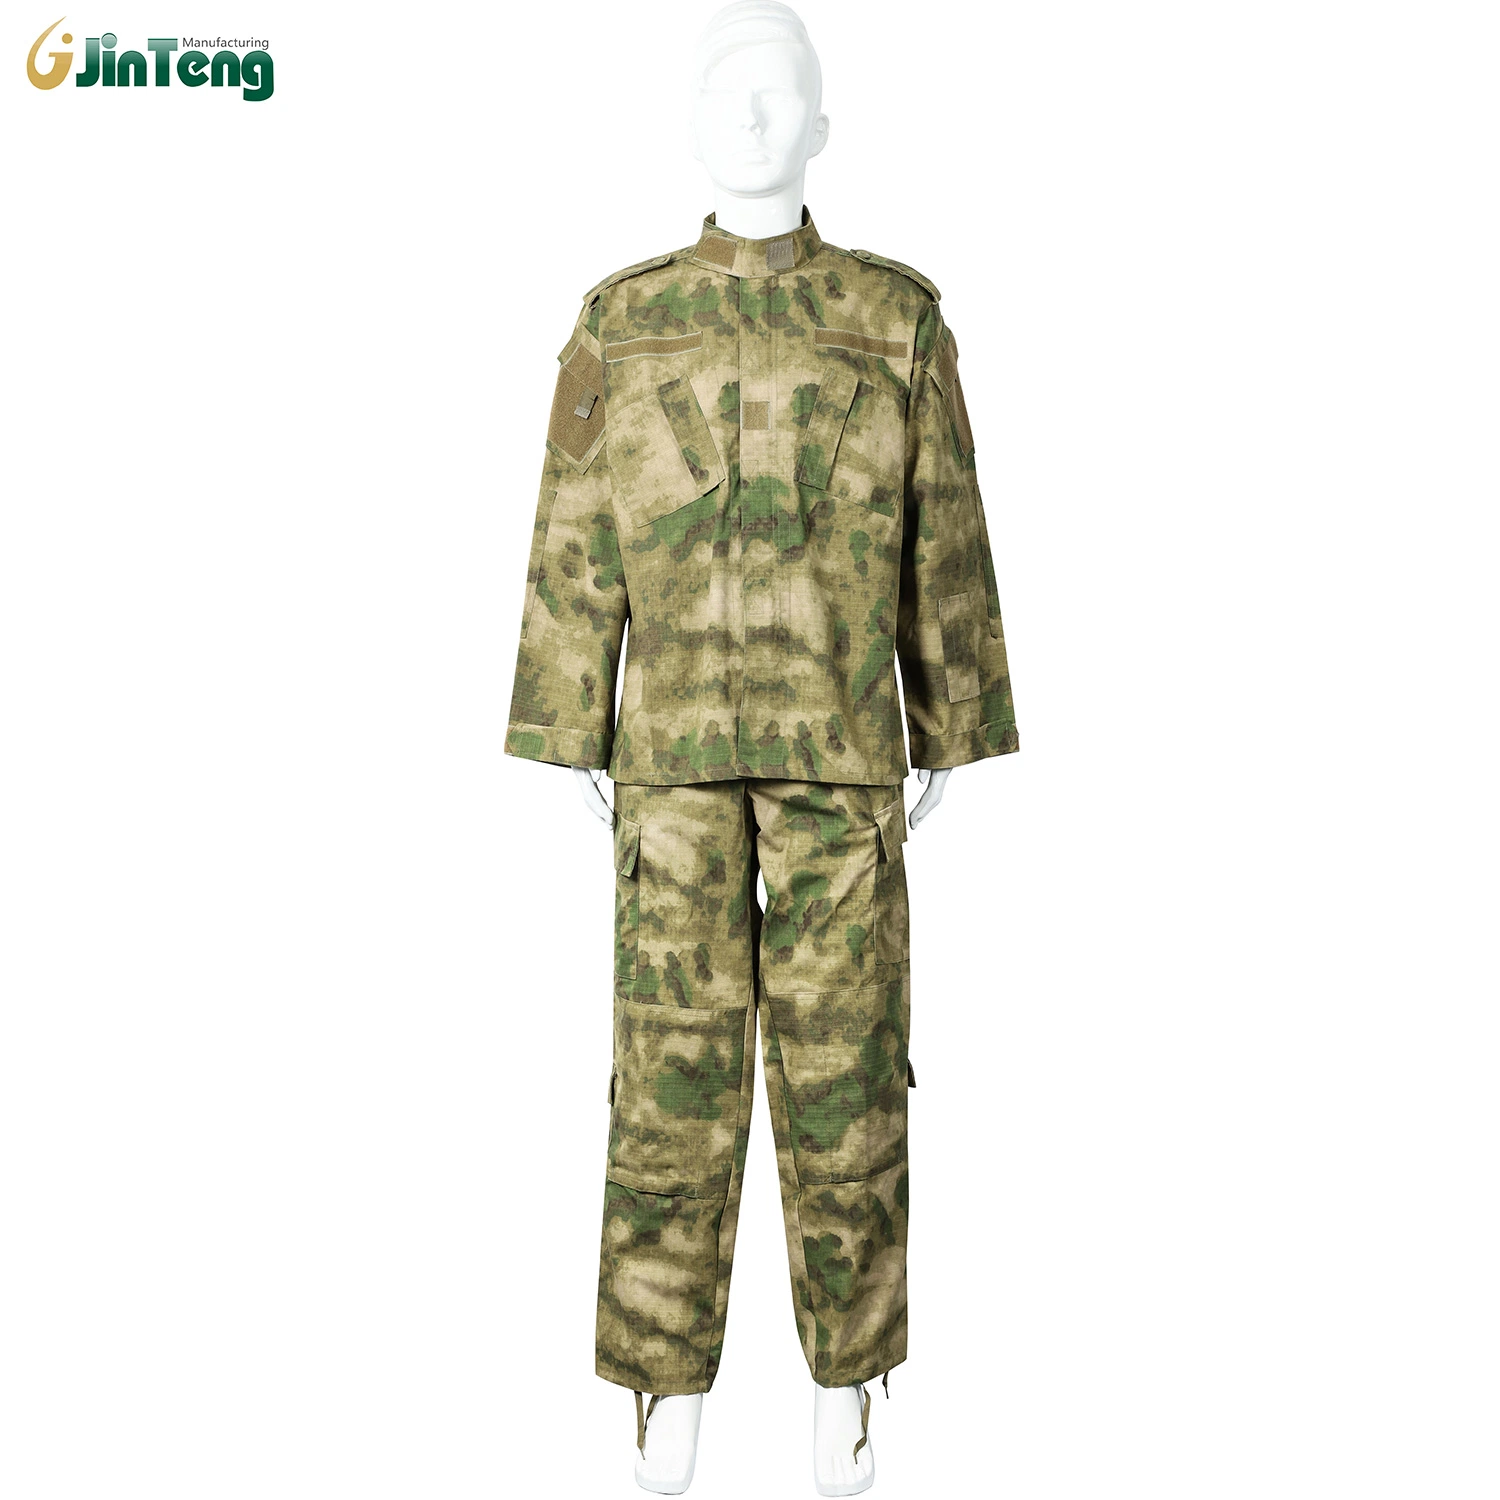 Outdoor Military Style Combat Uniforms Used Clothing Cheap Army Style Uniform